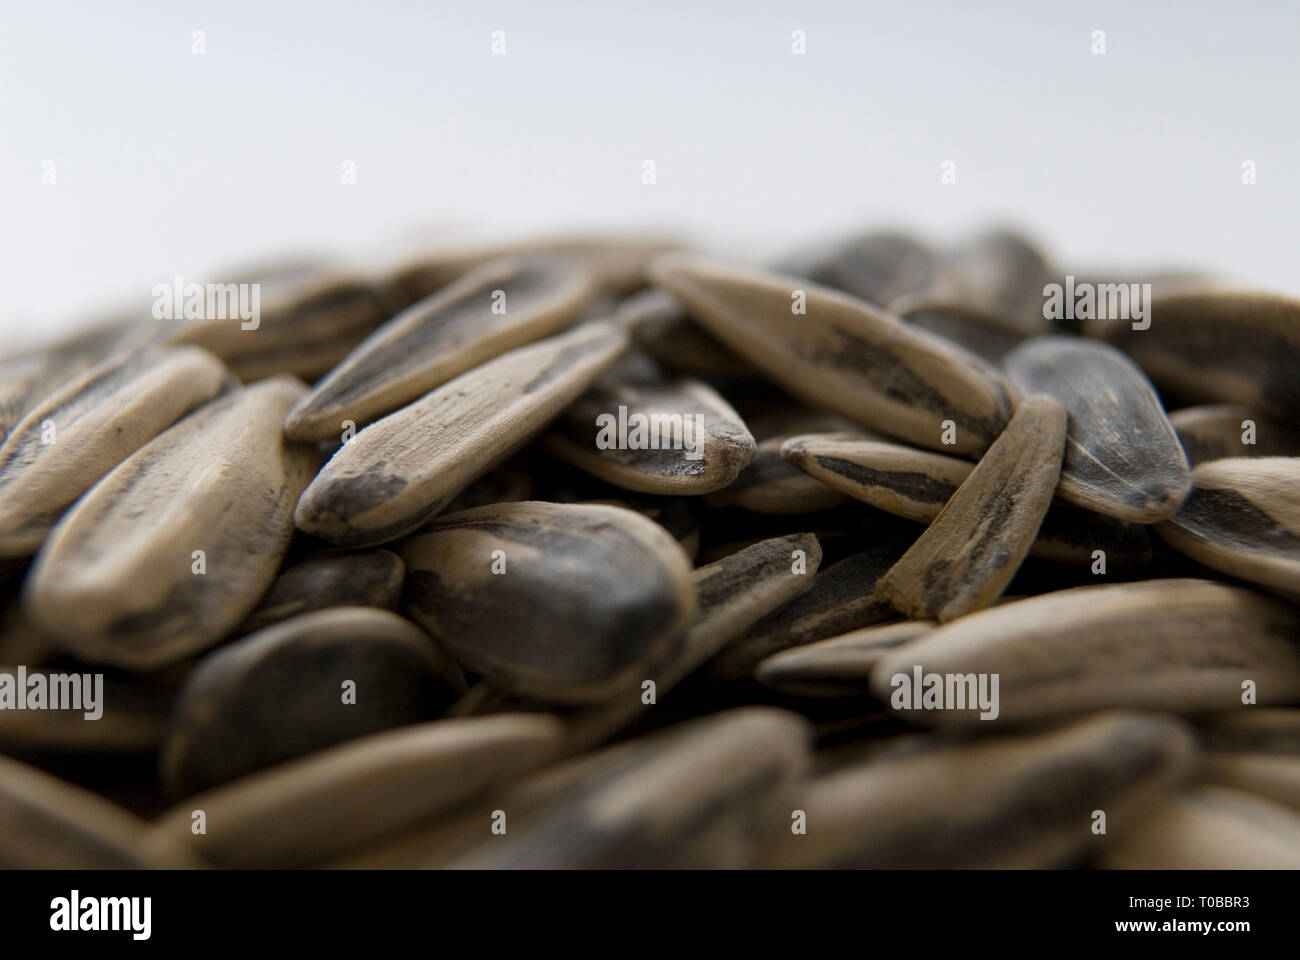 Closeup studio shot shows pile of sunflower seeds with blurred background. Stock Photo